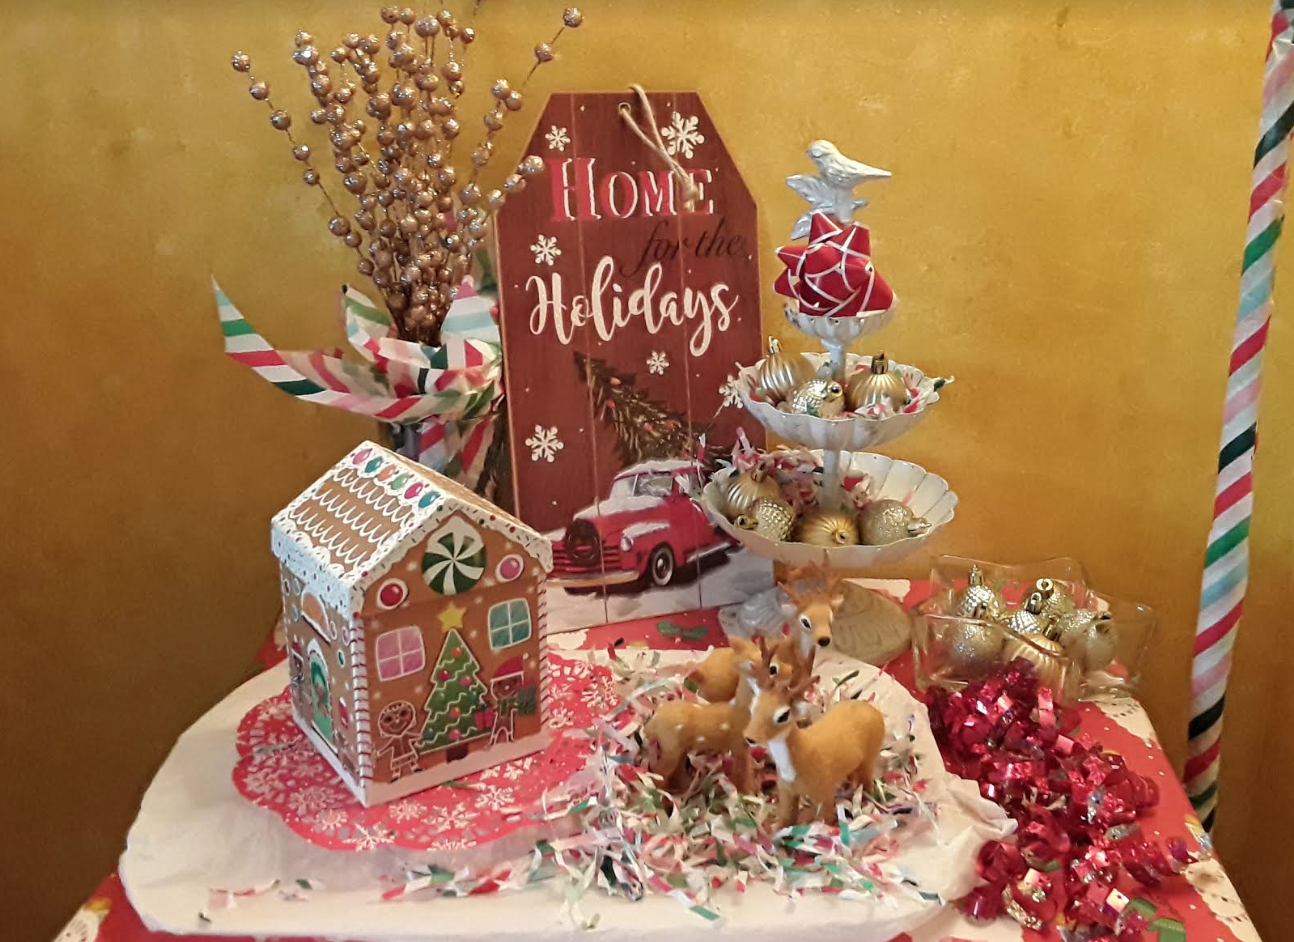 A festive table with a gingerbread house and lights